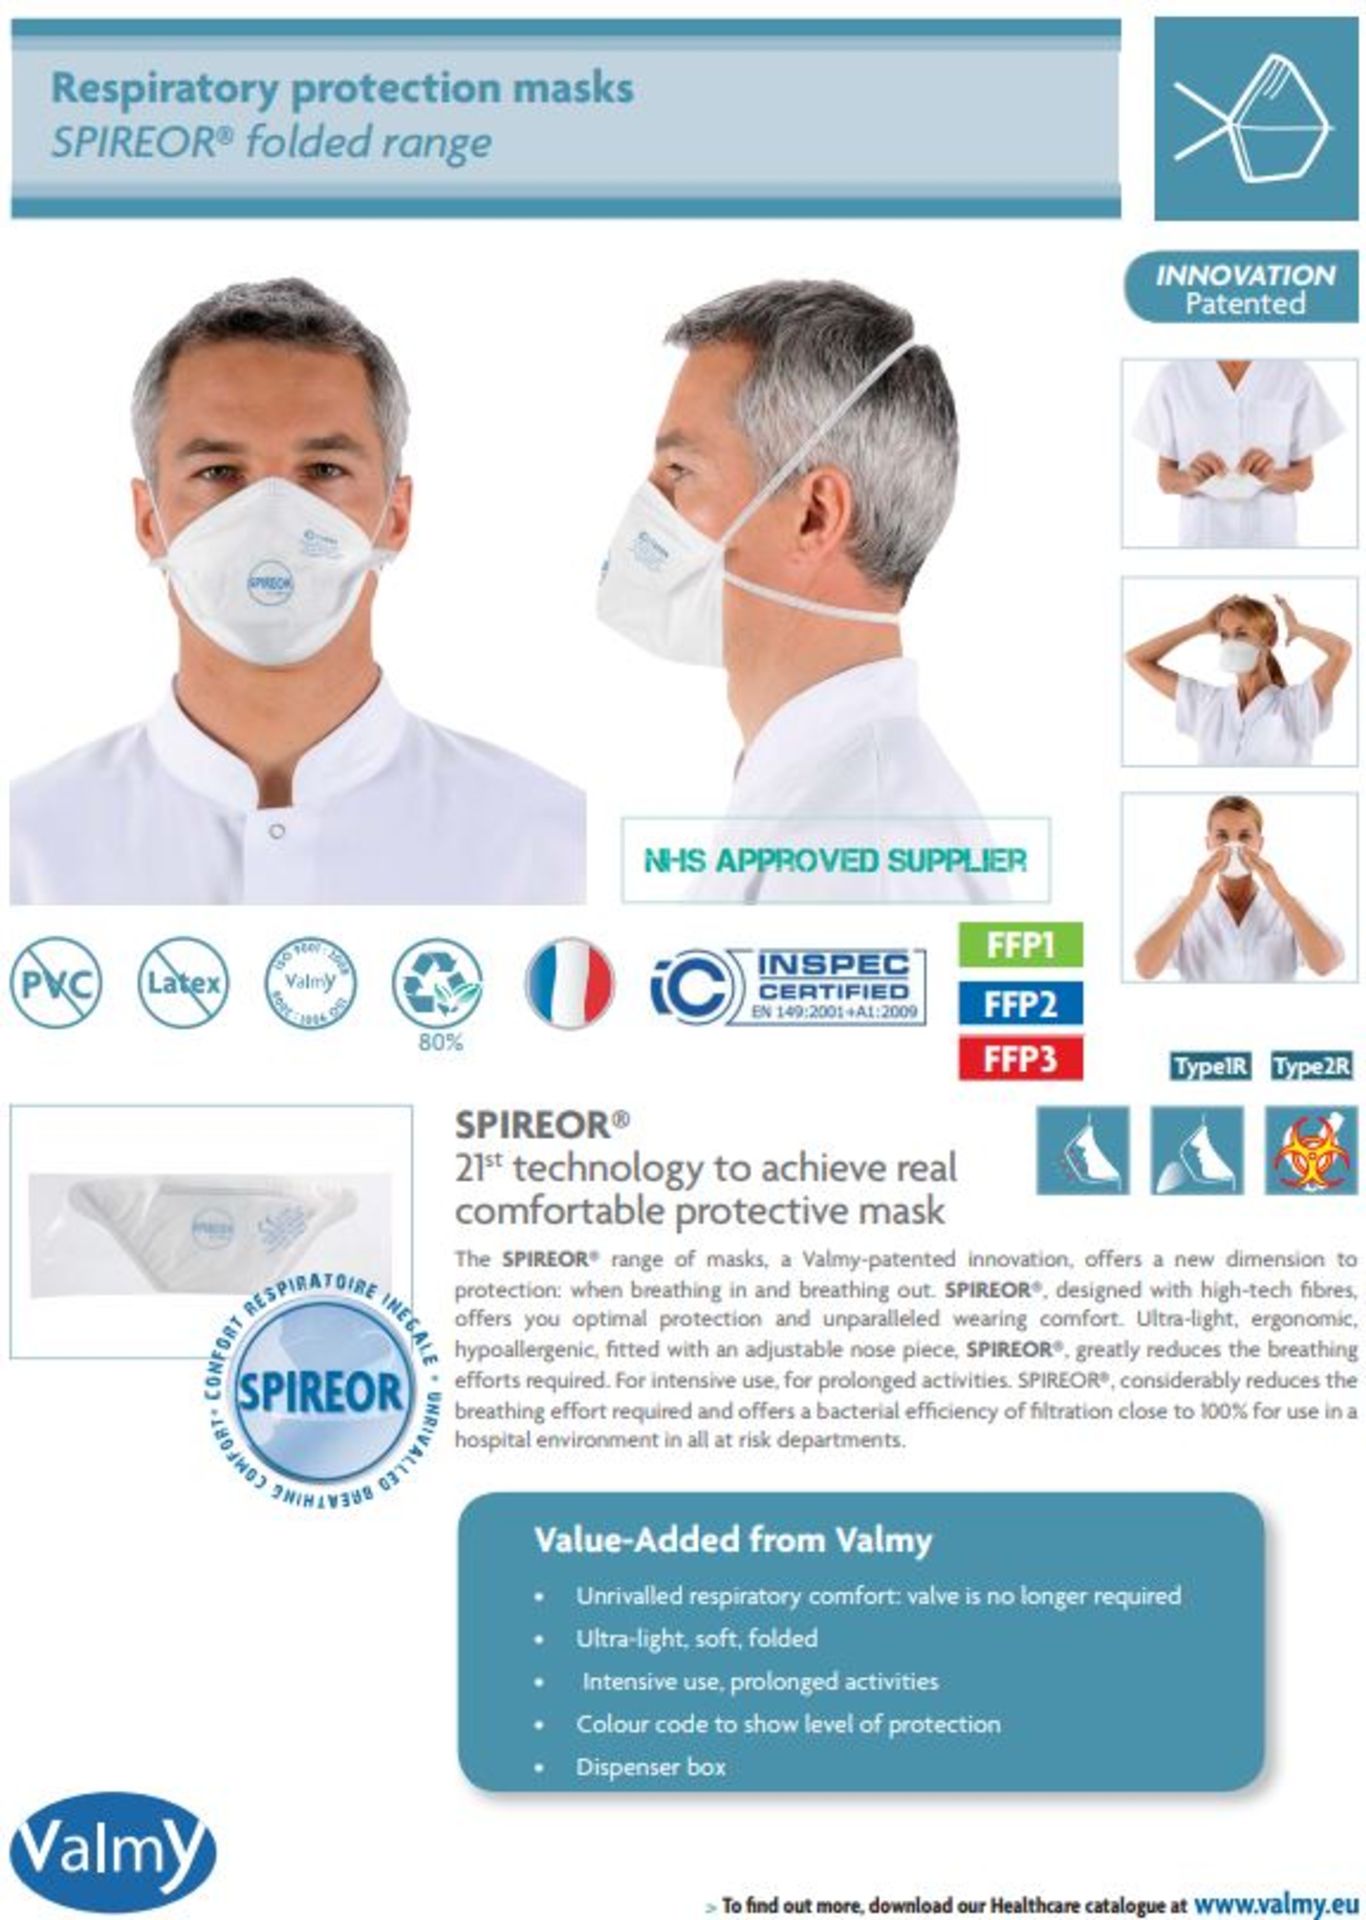 1,000 x Valmy Spireor Resparitory FFP3 Face Masks - NHS Approved - Stock Code VSP352TF-07C - New - Image 3 of 7